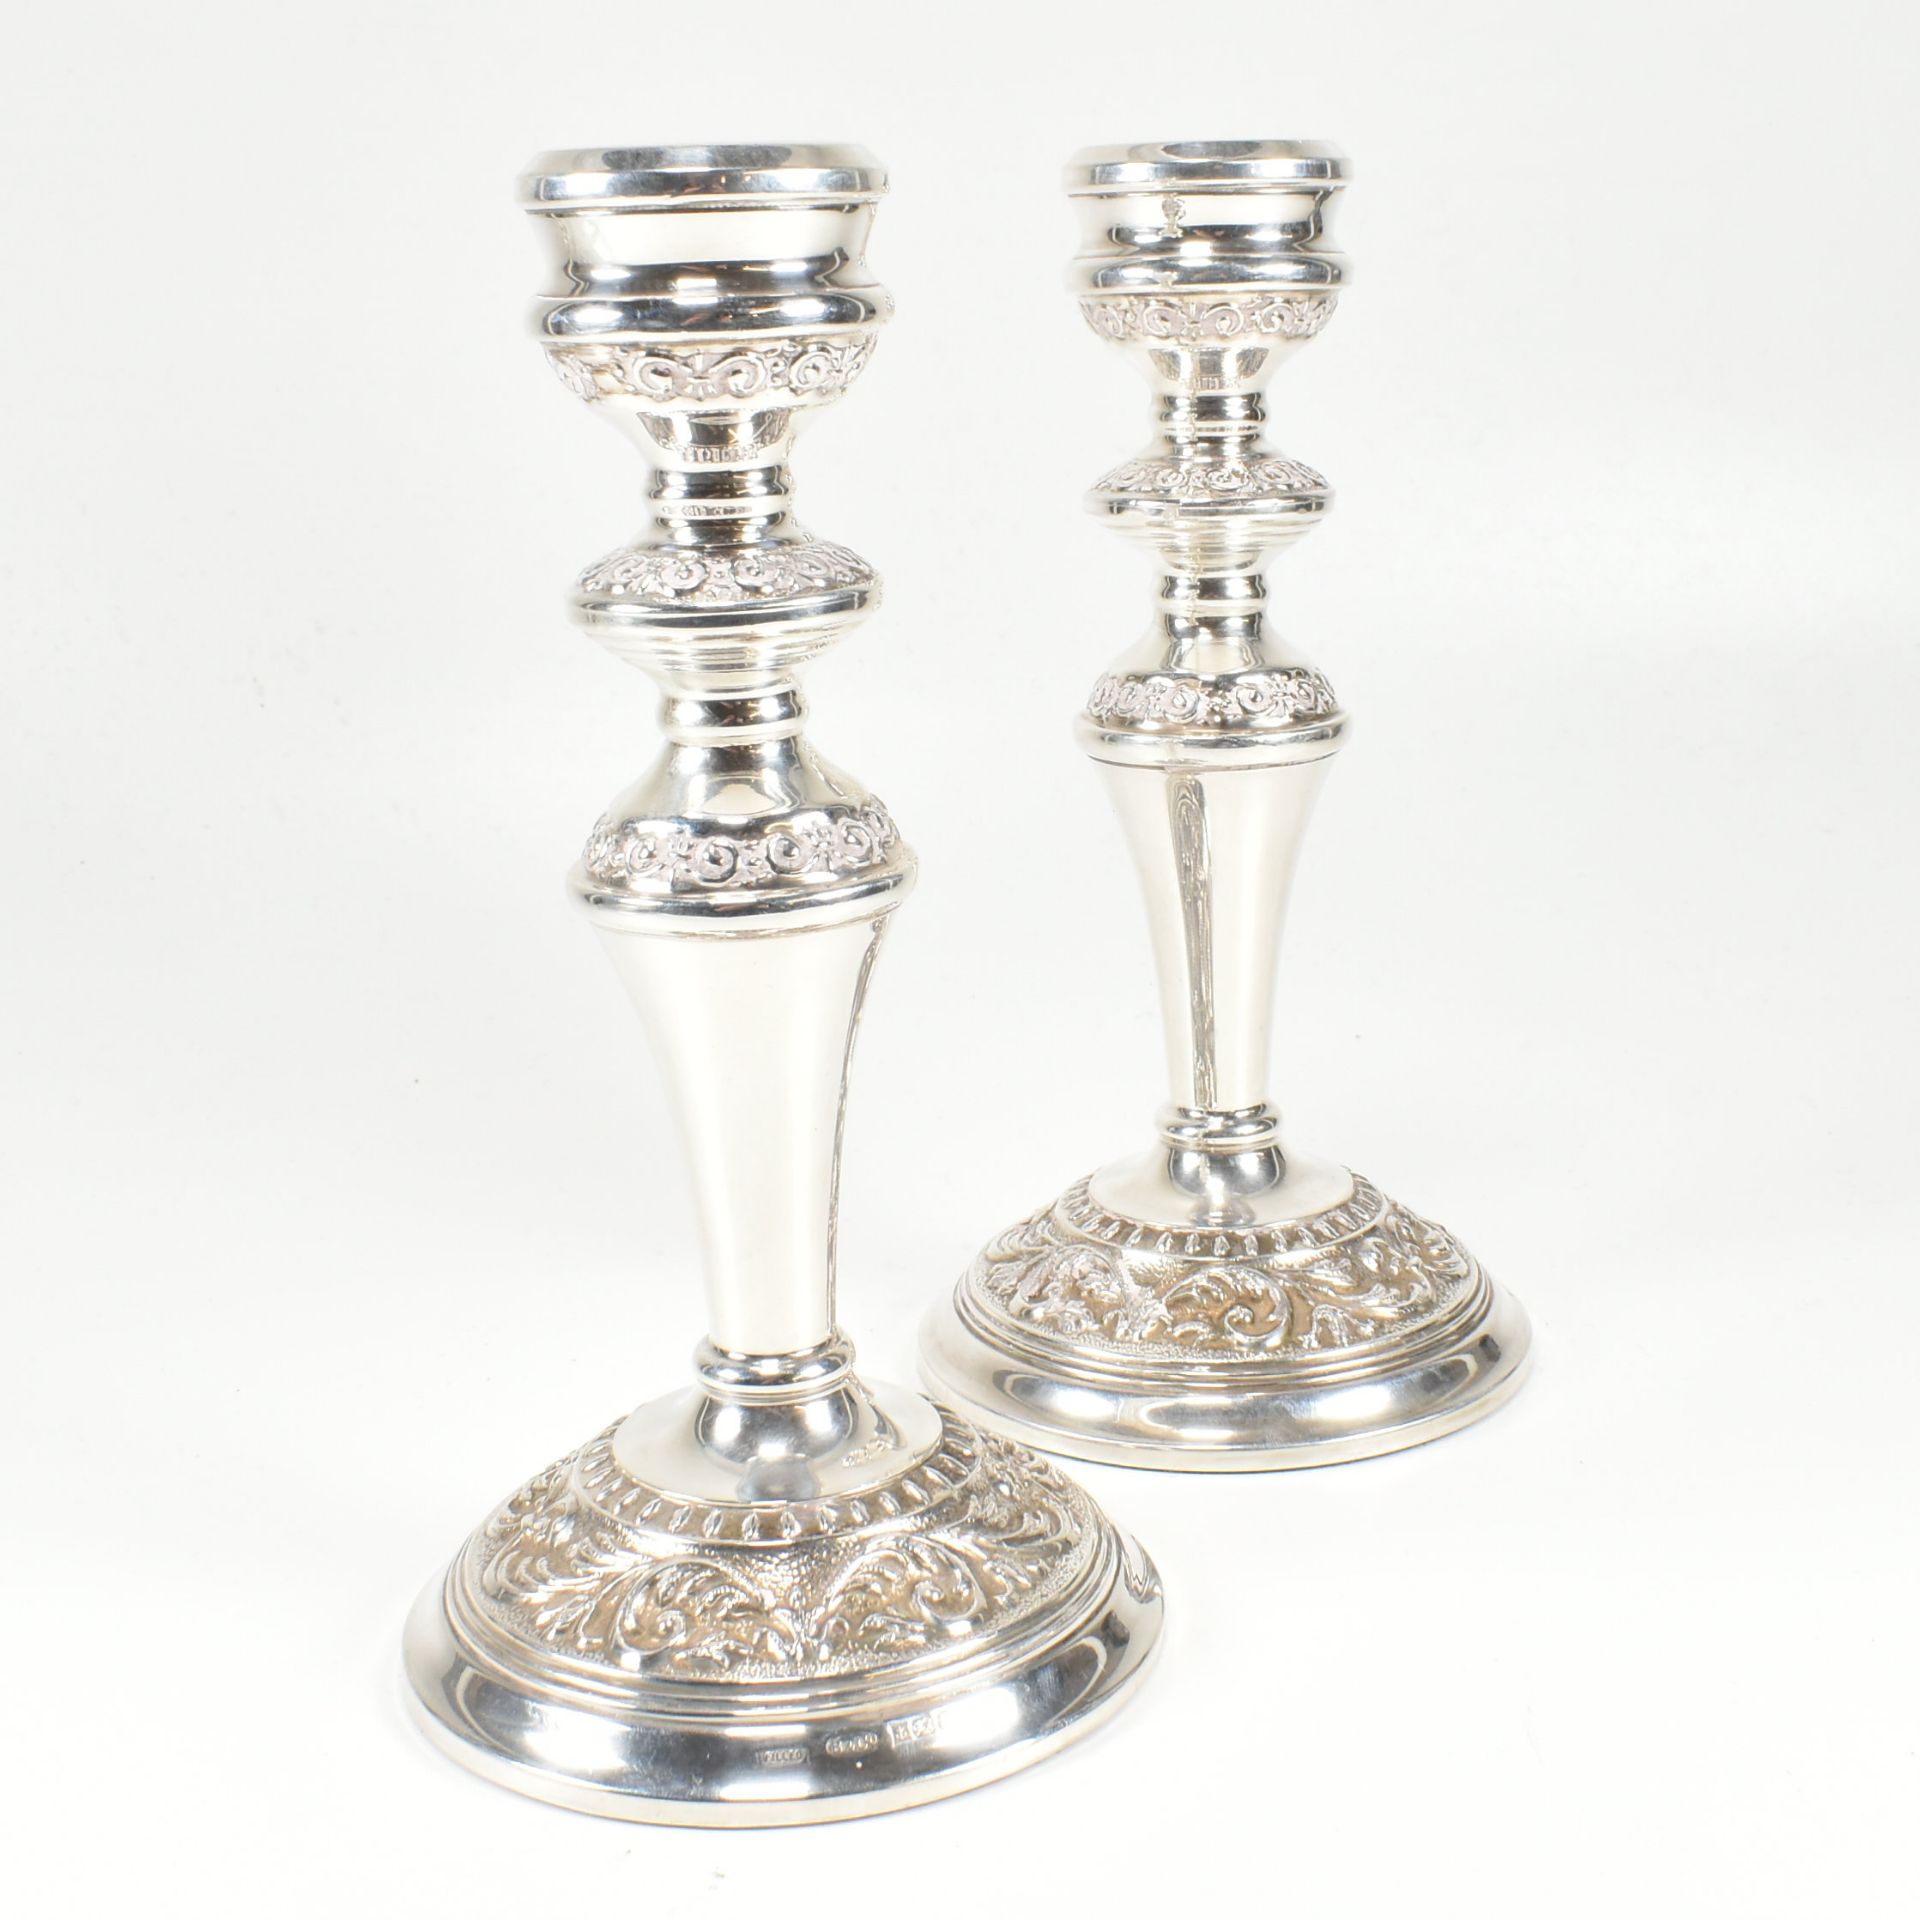 PAIR OF 1970S HALLMARKED SILVER MOUNTED CANDLESTICKS - Image 4 of 7